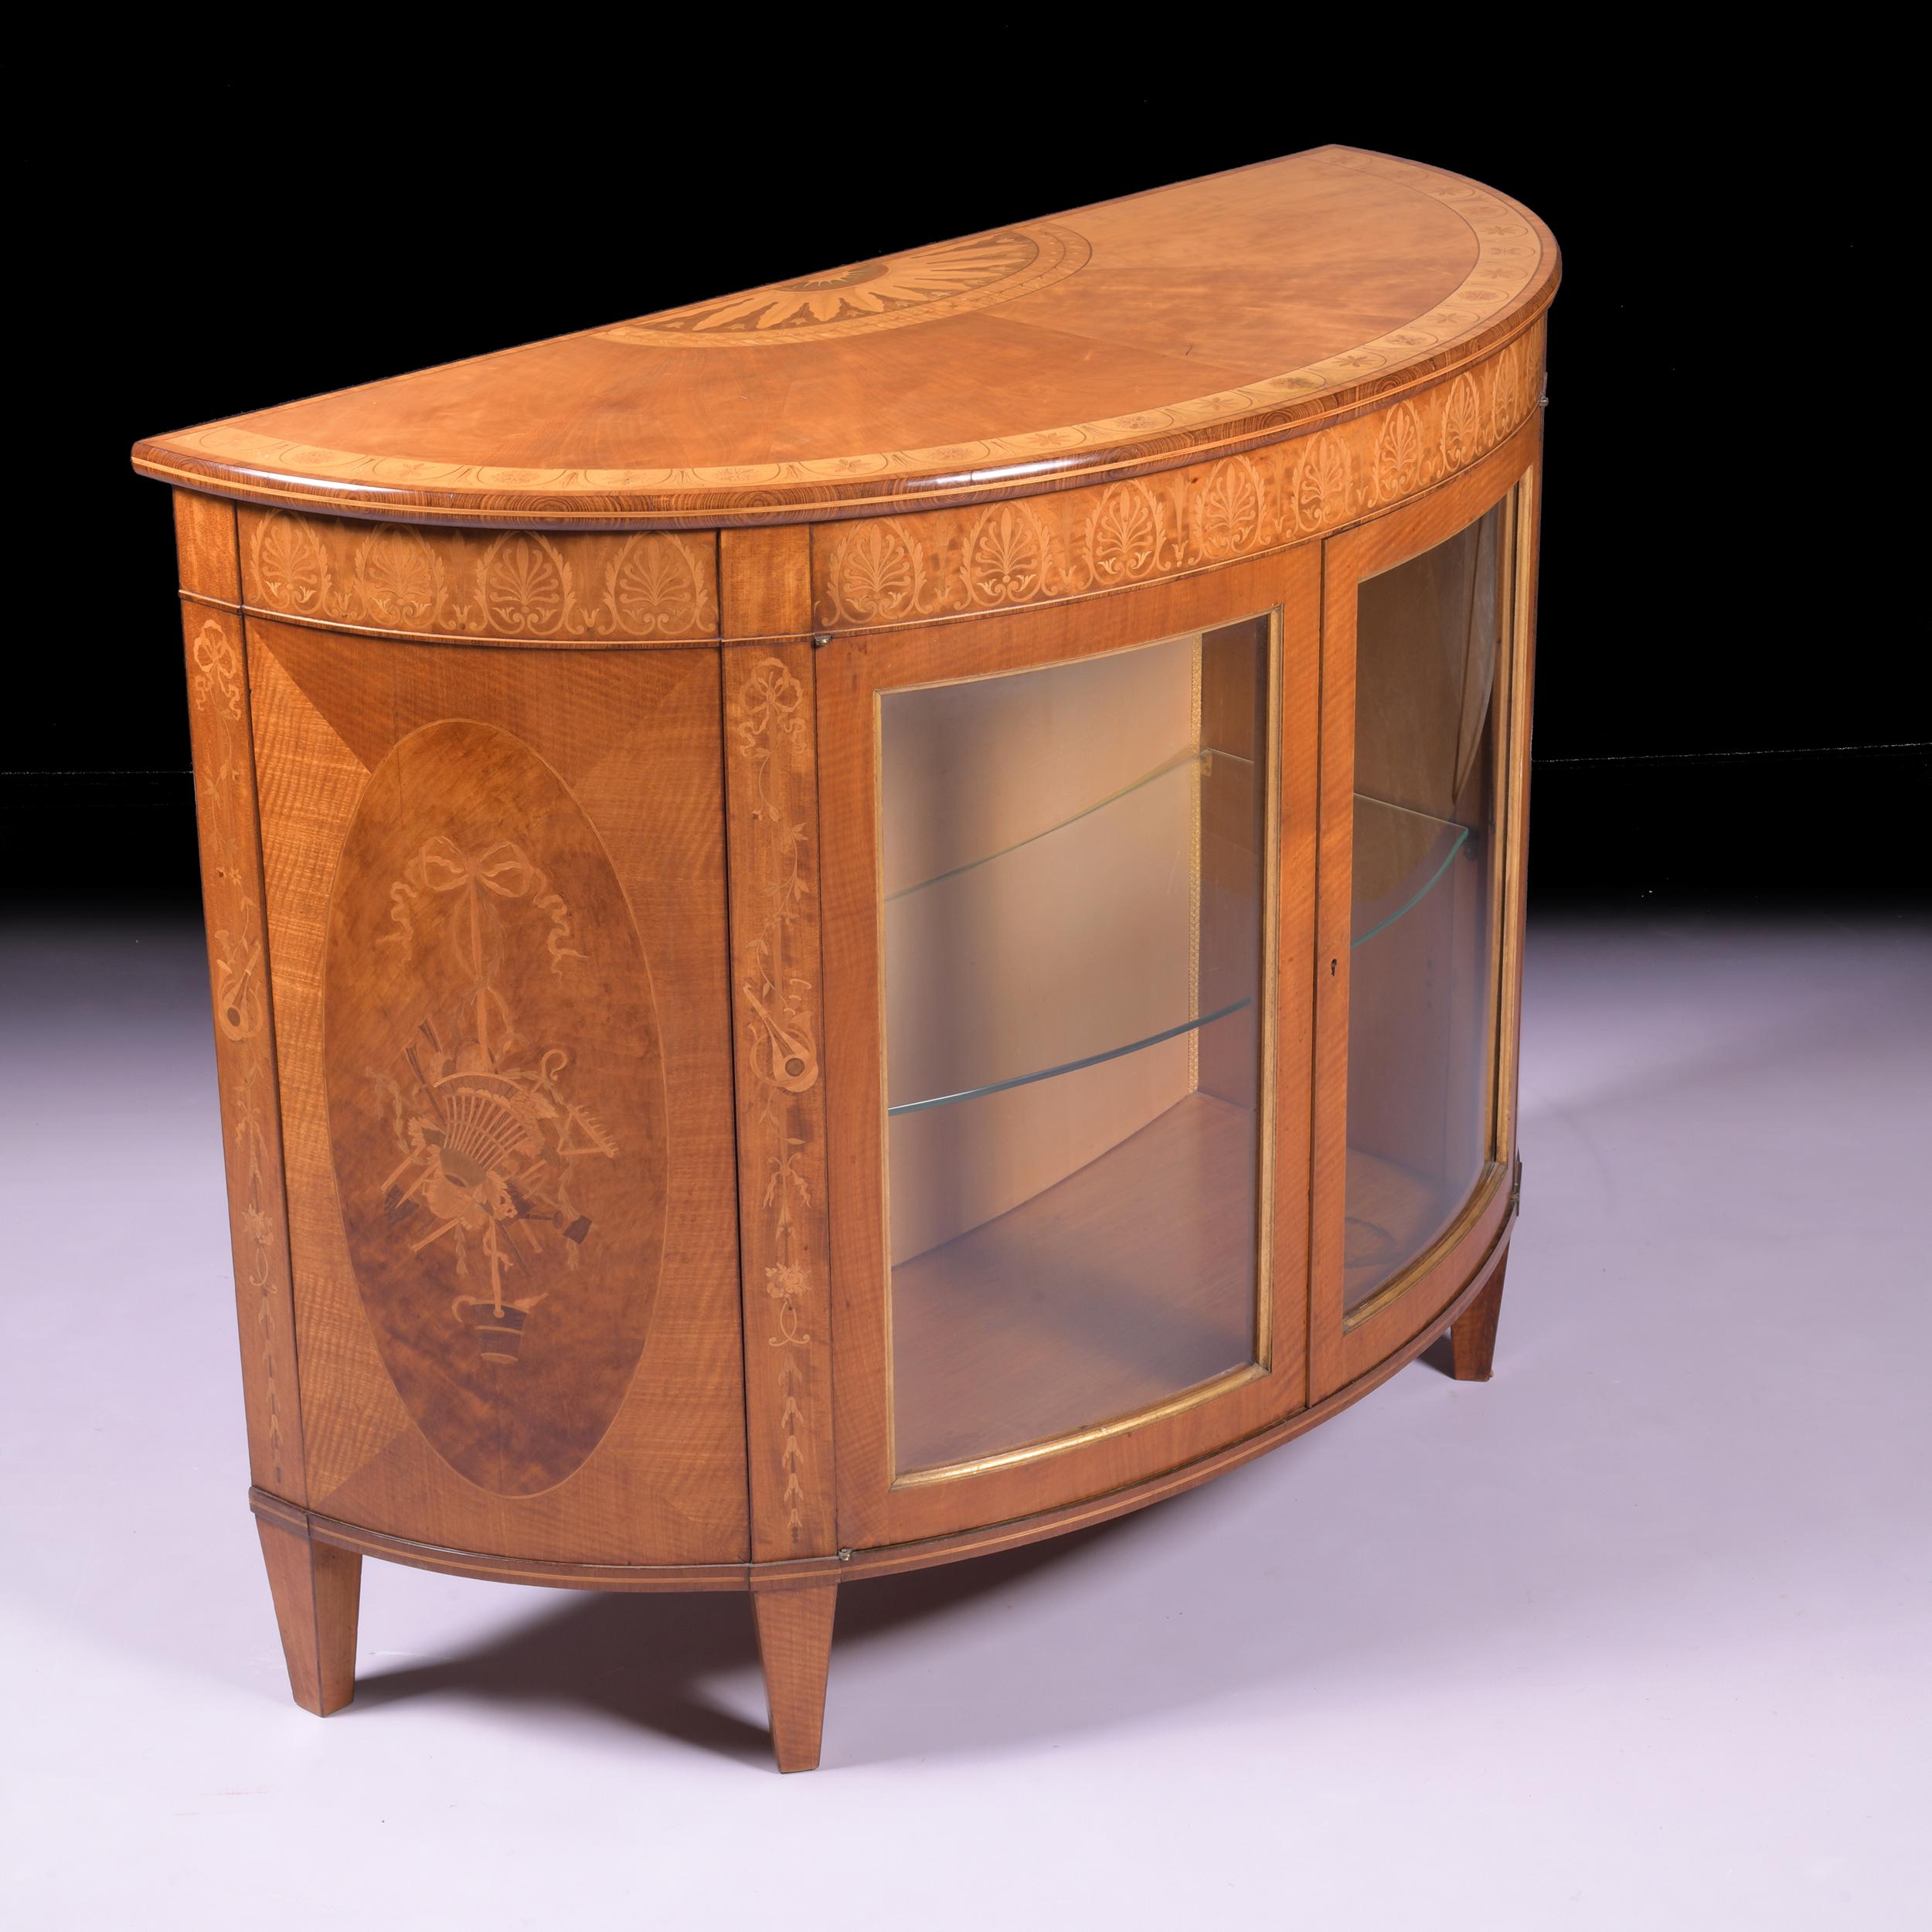 A magnificent satinwood and marquetry inlaid semi elliptical commode by James Hicks of Dublin. The rosewood banded top inlaid with a half patera with floral bandings with an outer band of stylised flower heads, and a band of flowerheads, and